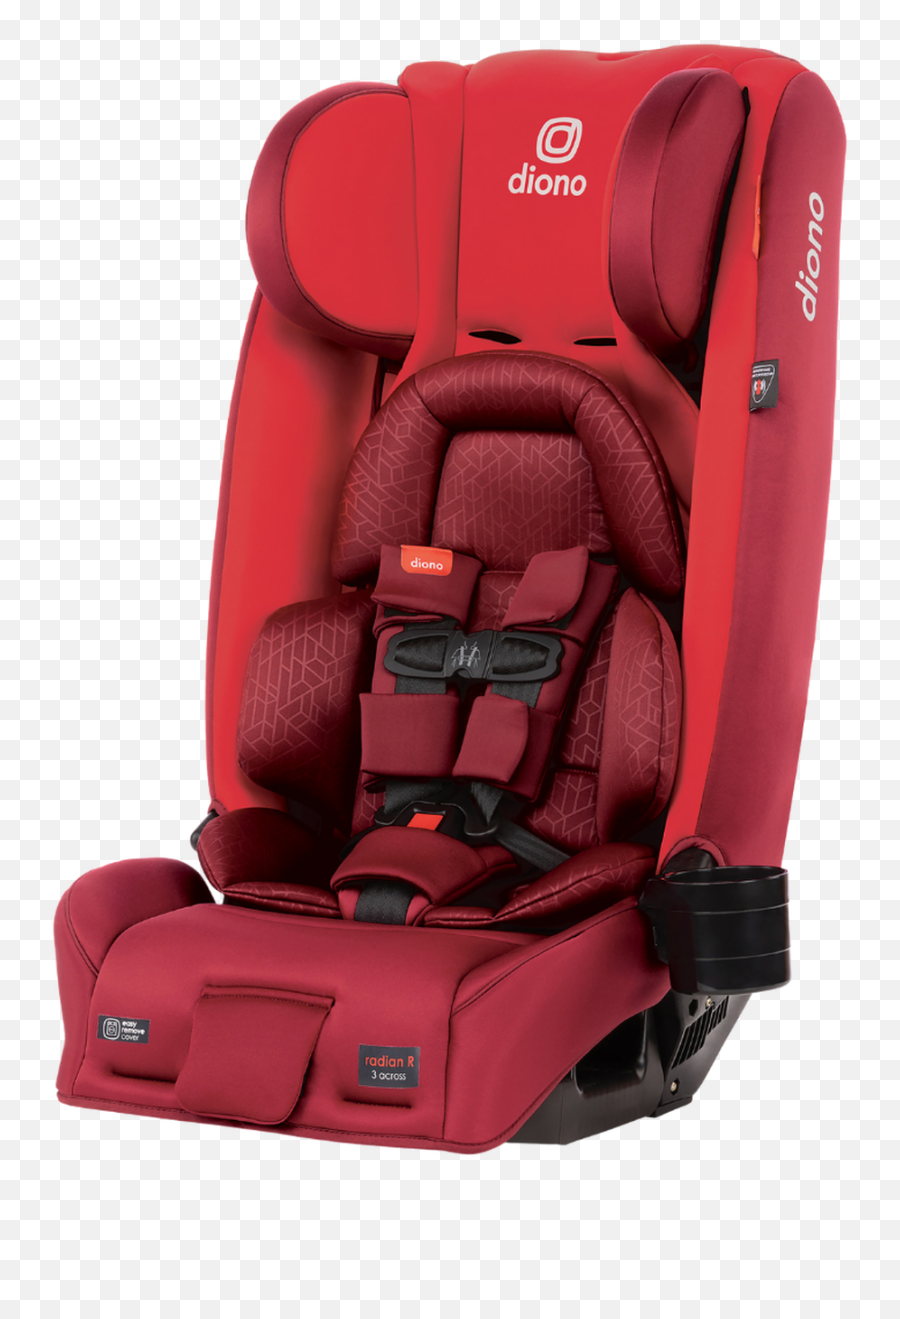 Radian 3rxt Car Seat Diono Seats U0026 Booster - Diono Radian Png,Kancolle Kia Red Face Icon